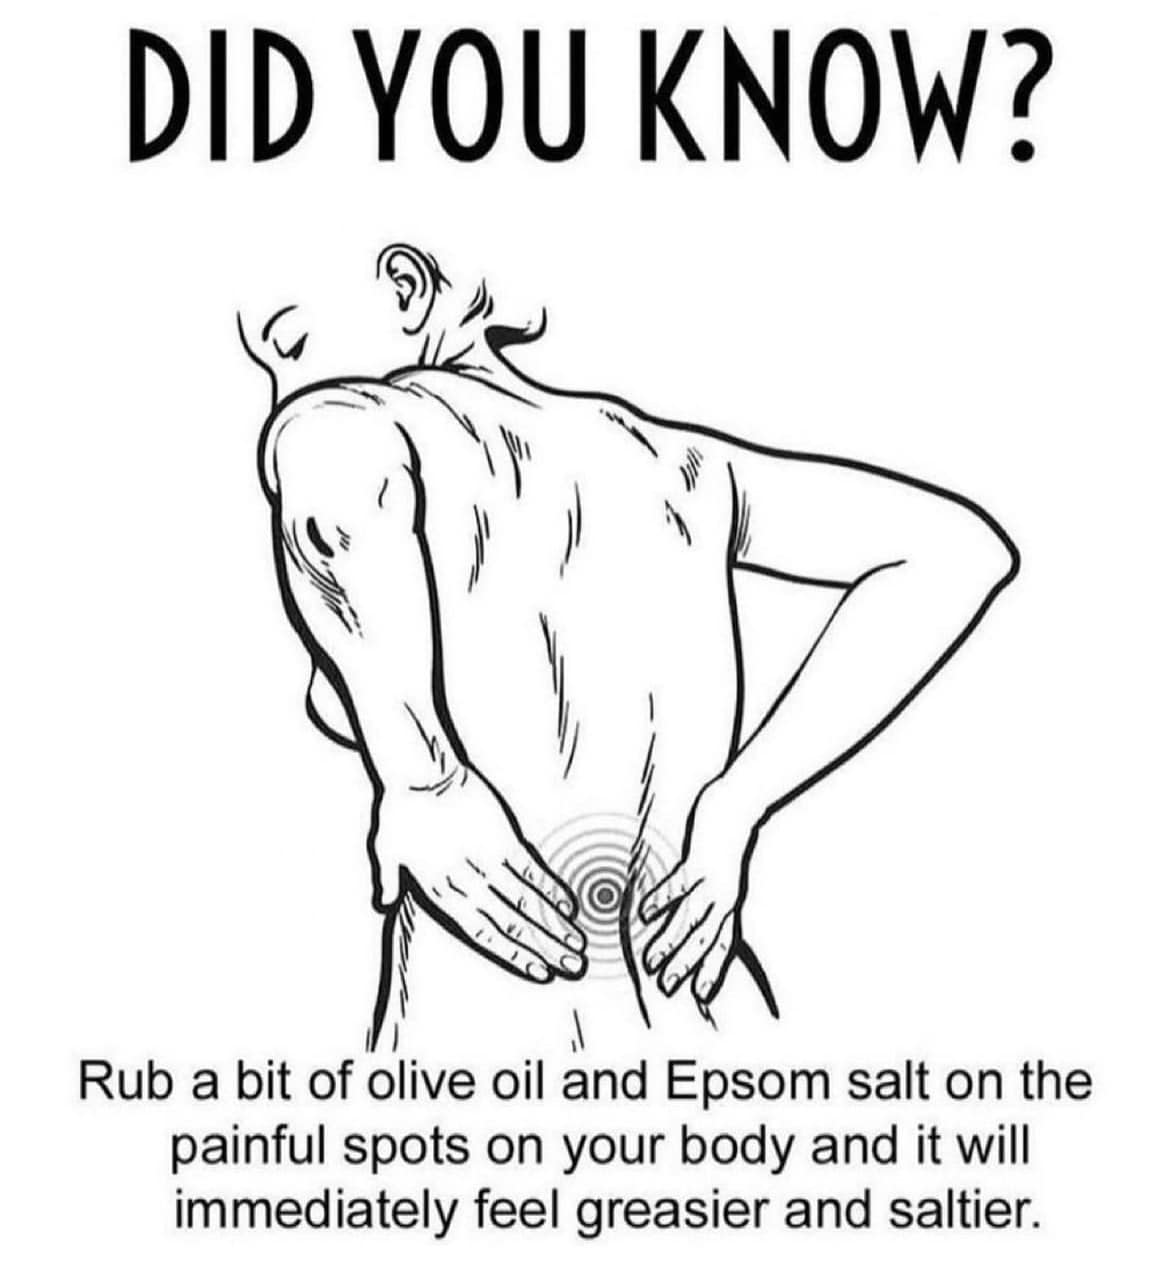 did you know, rub a bit of olive oil and epsom salt on the painful spots on your body and it will immediately feel greasier and saltier, wtf